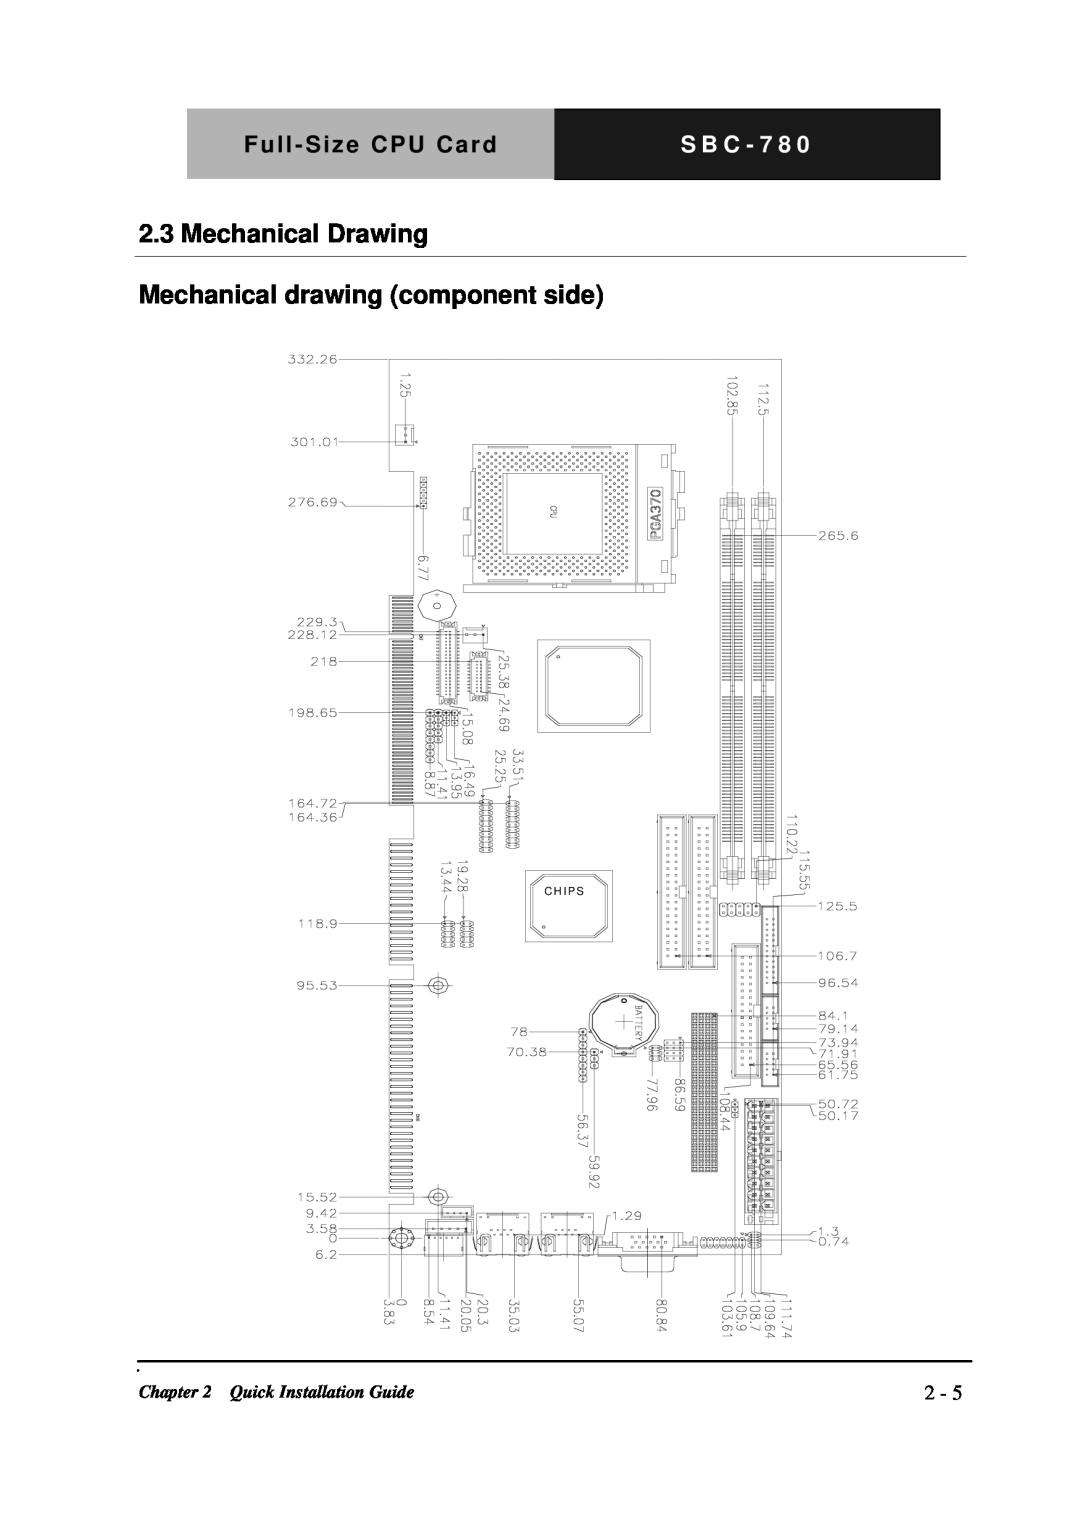 Intel SBC-780 manual Mechanical Drawing, Mechanical drawing component side, S B C - 7, Quick Installation Guide, C H I P S 